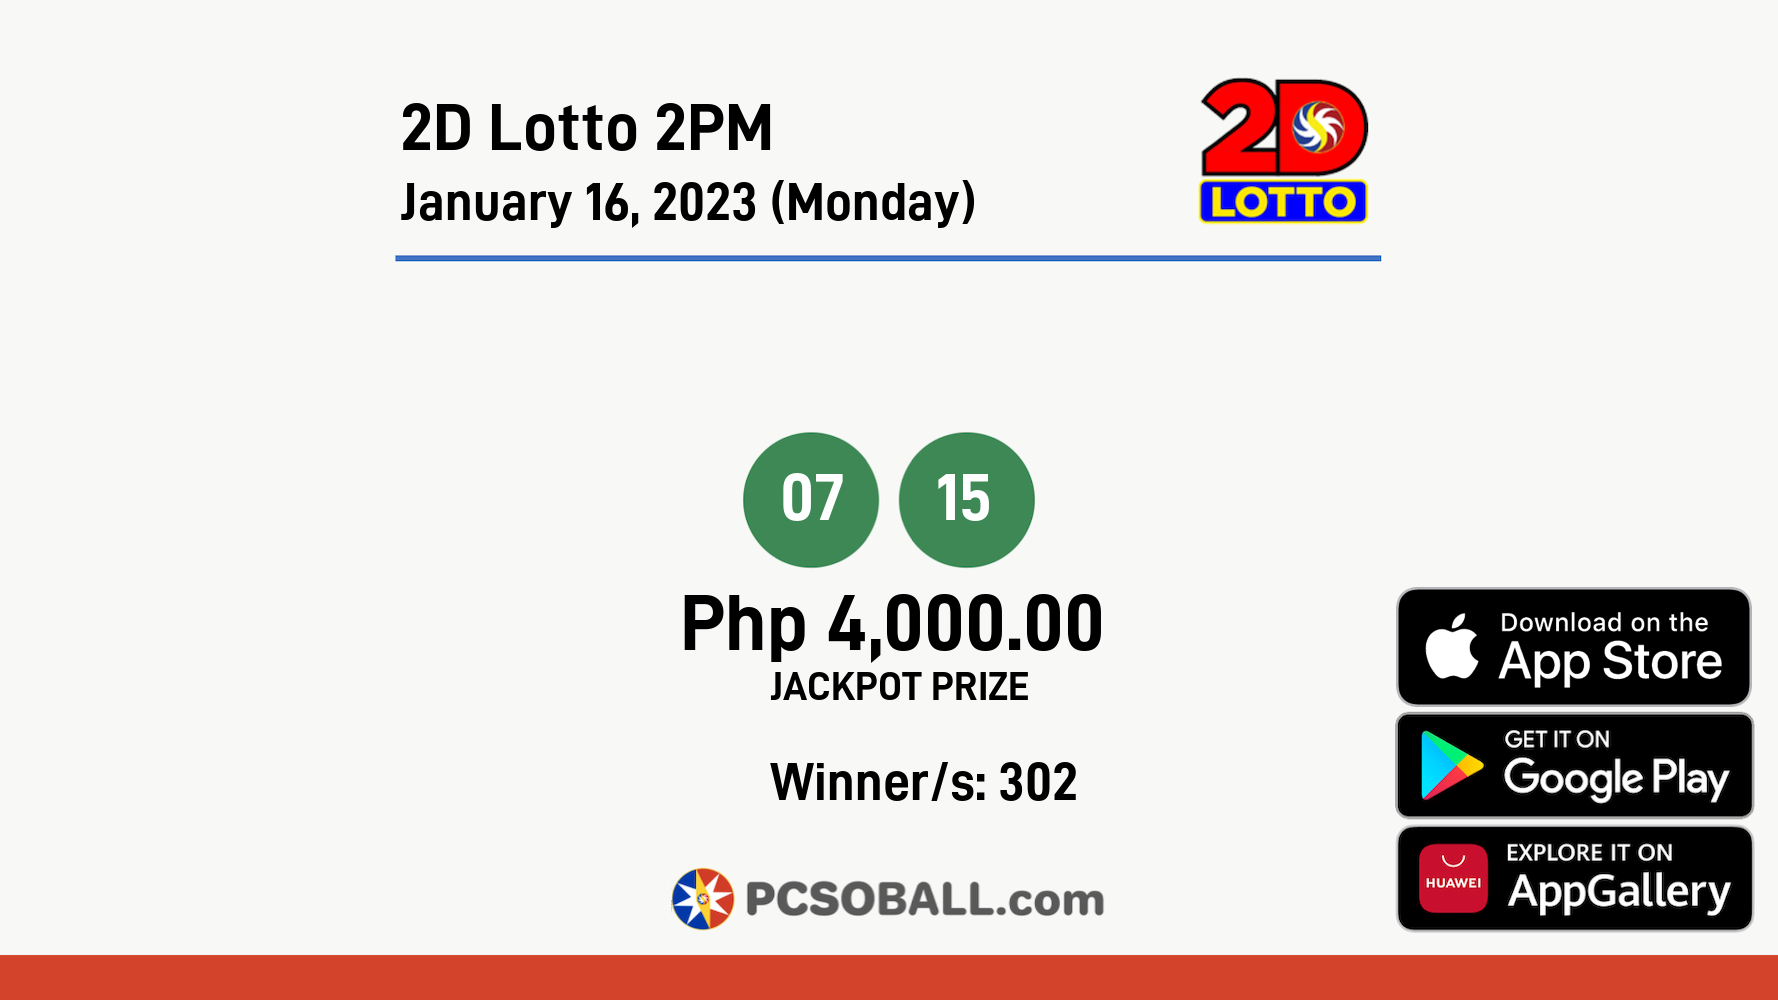 2D Lotto 2PM January 16, 2023 (Monday) Result